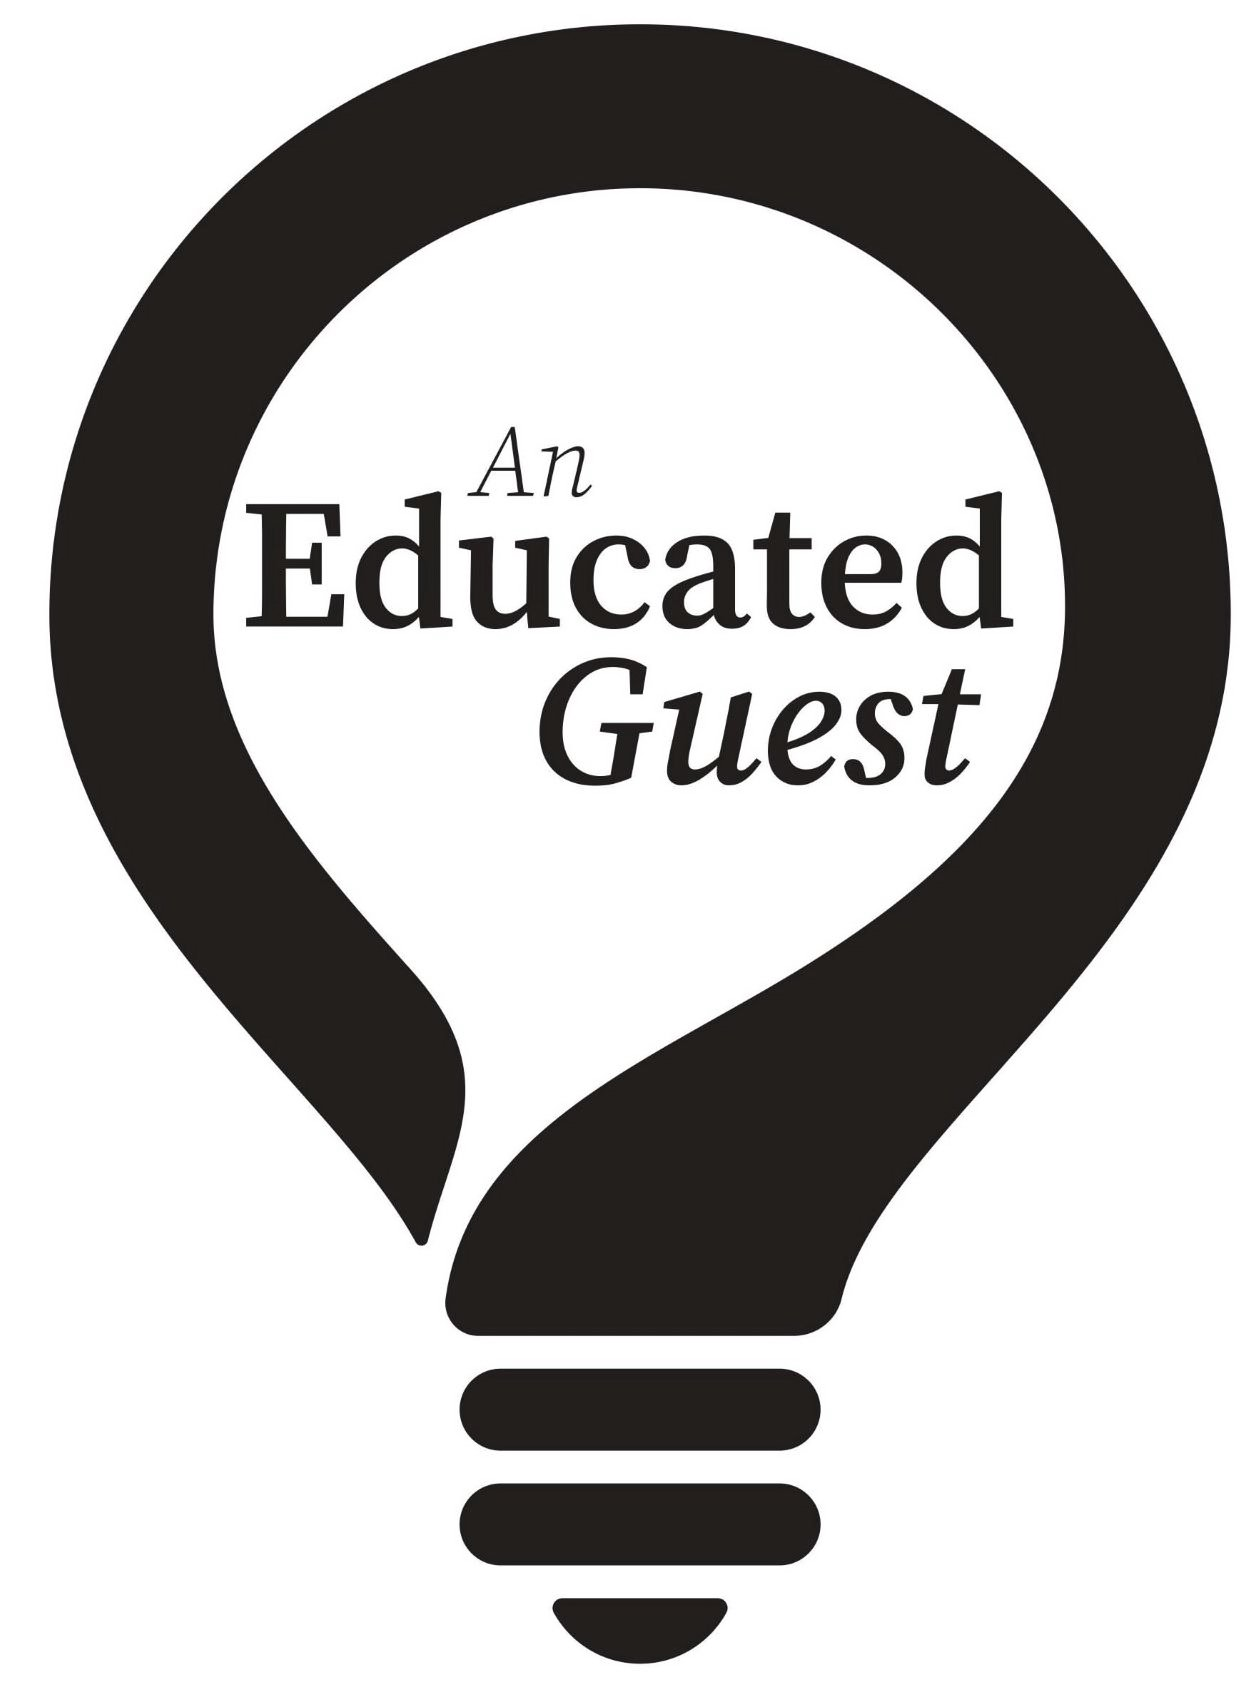  AN EDUCATED GUEST